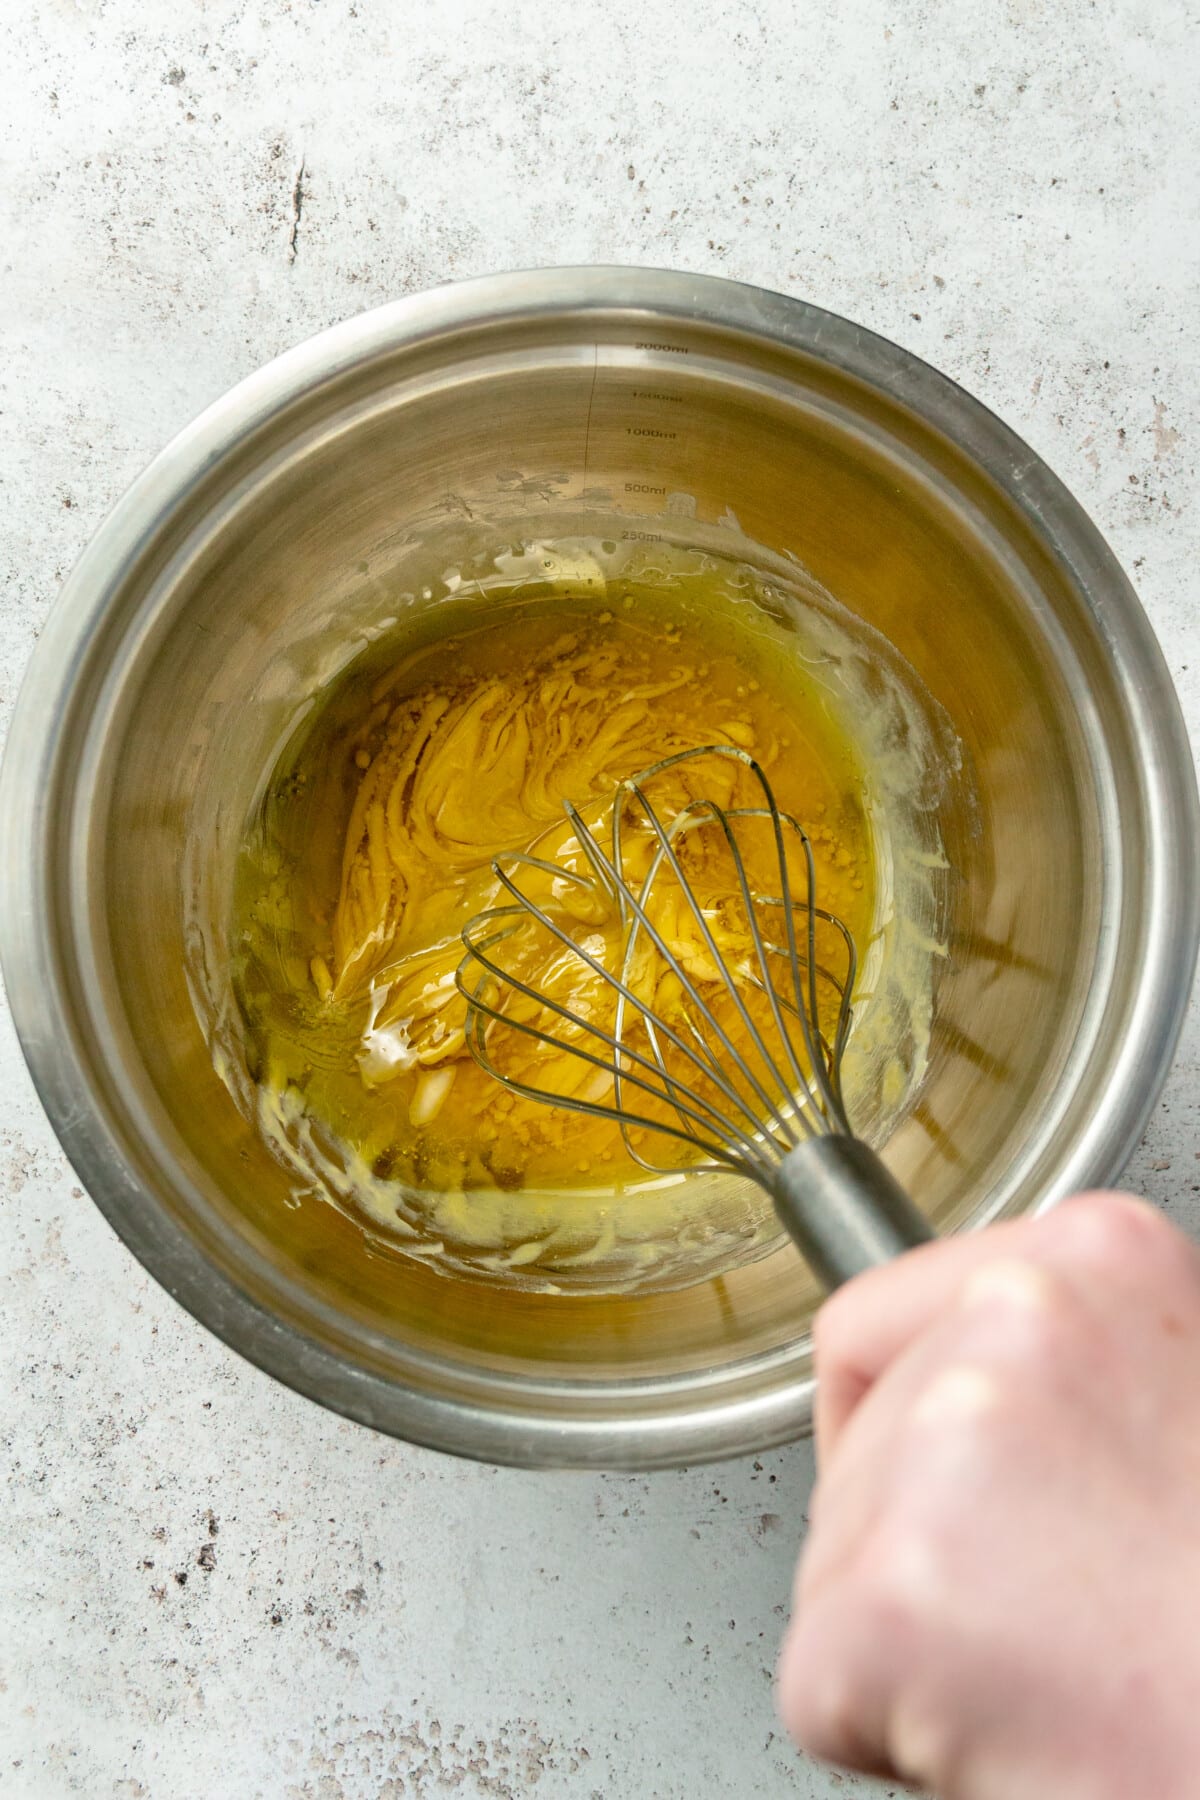 A honey mustard sauce is whisked in a stainless steel bowl on a light grey colored surface.